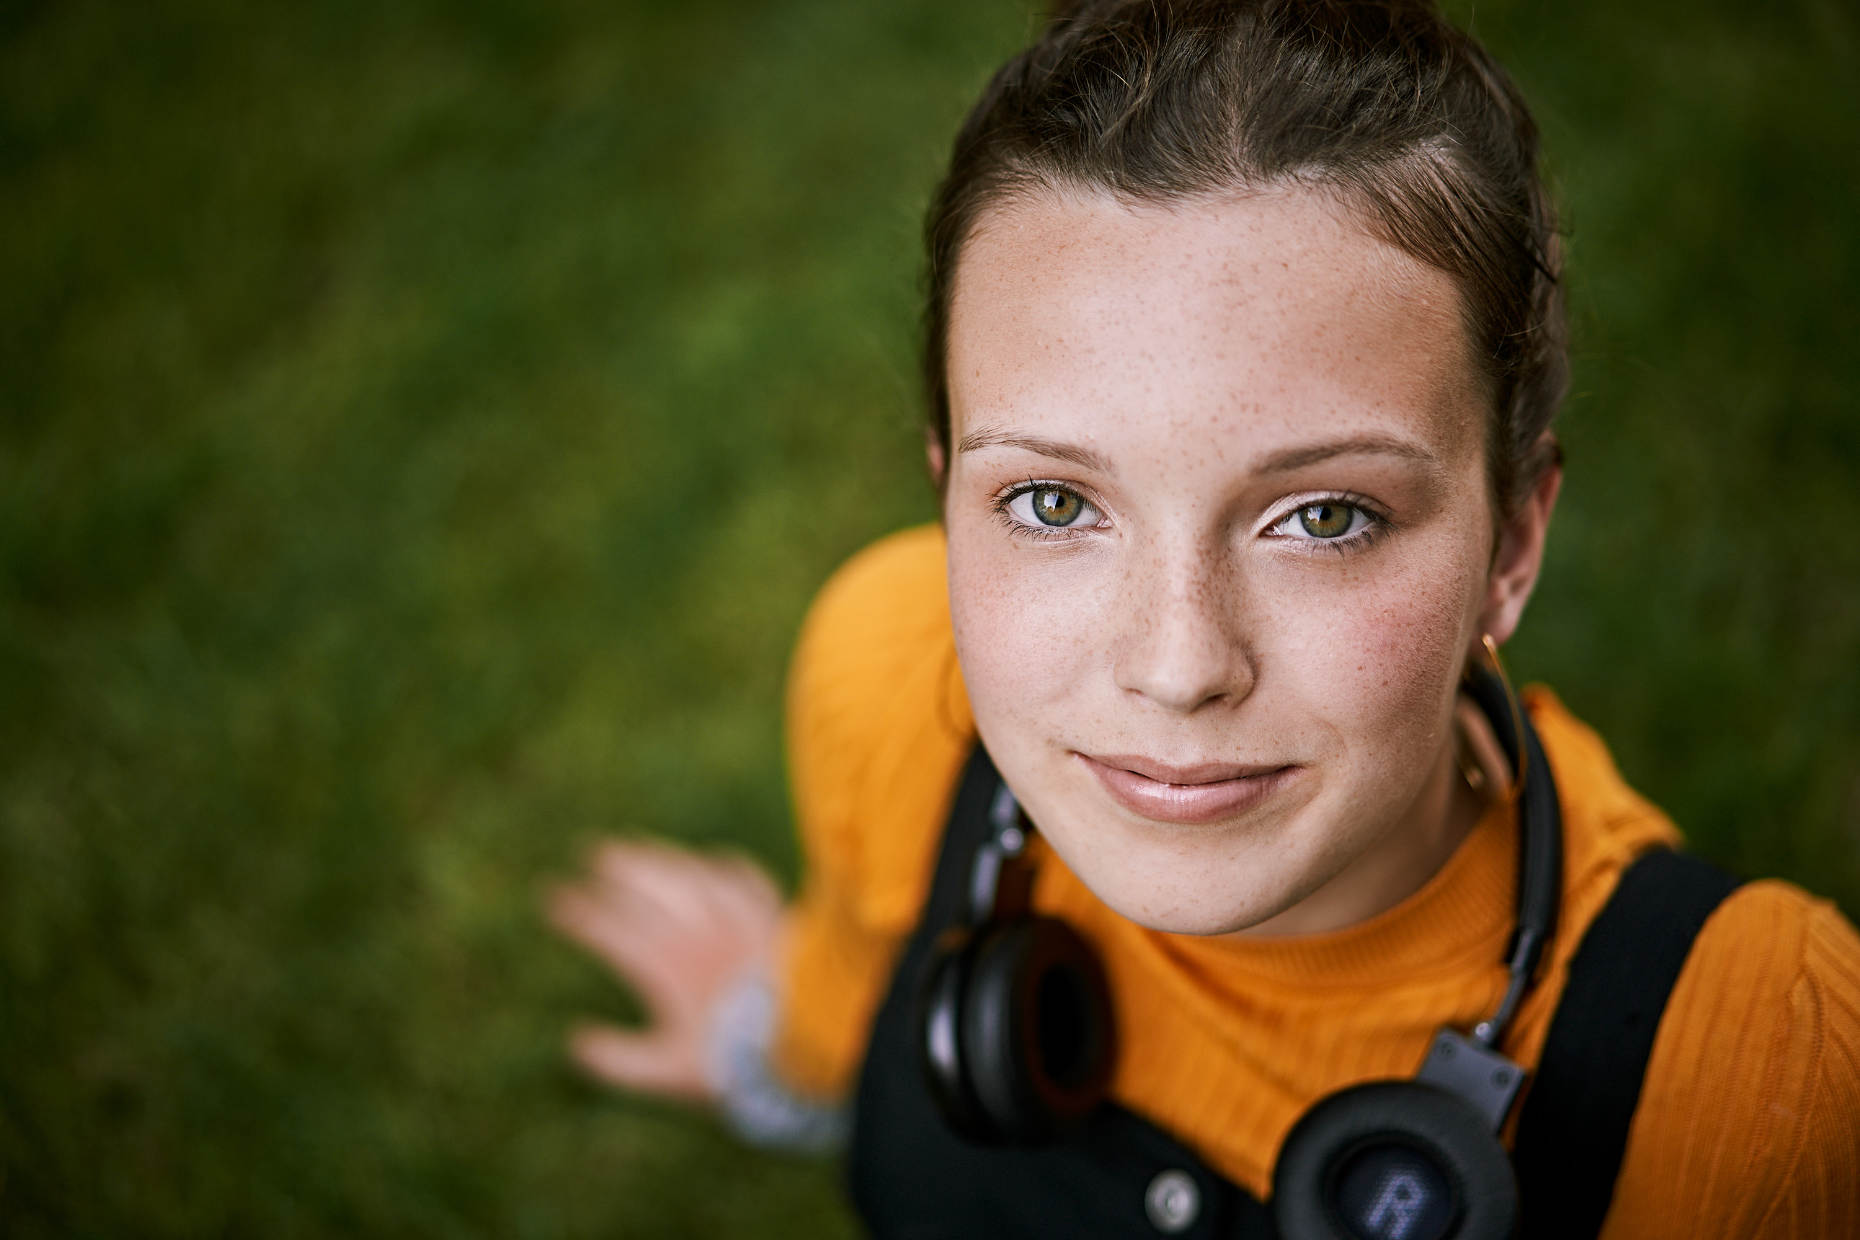 Young girl with freckles wearing head phones around her neck with a very optimistic  and self confident look on her face